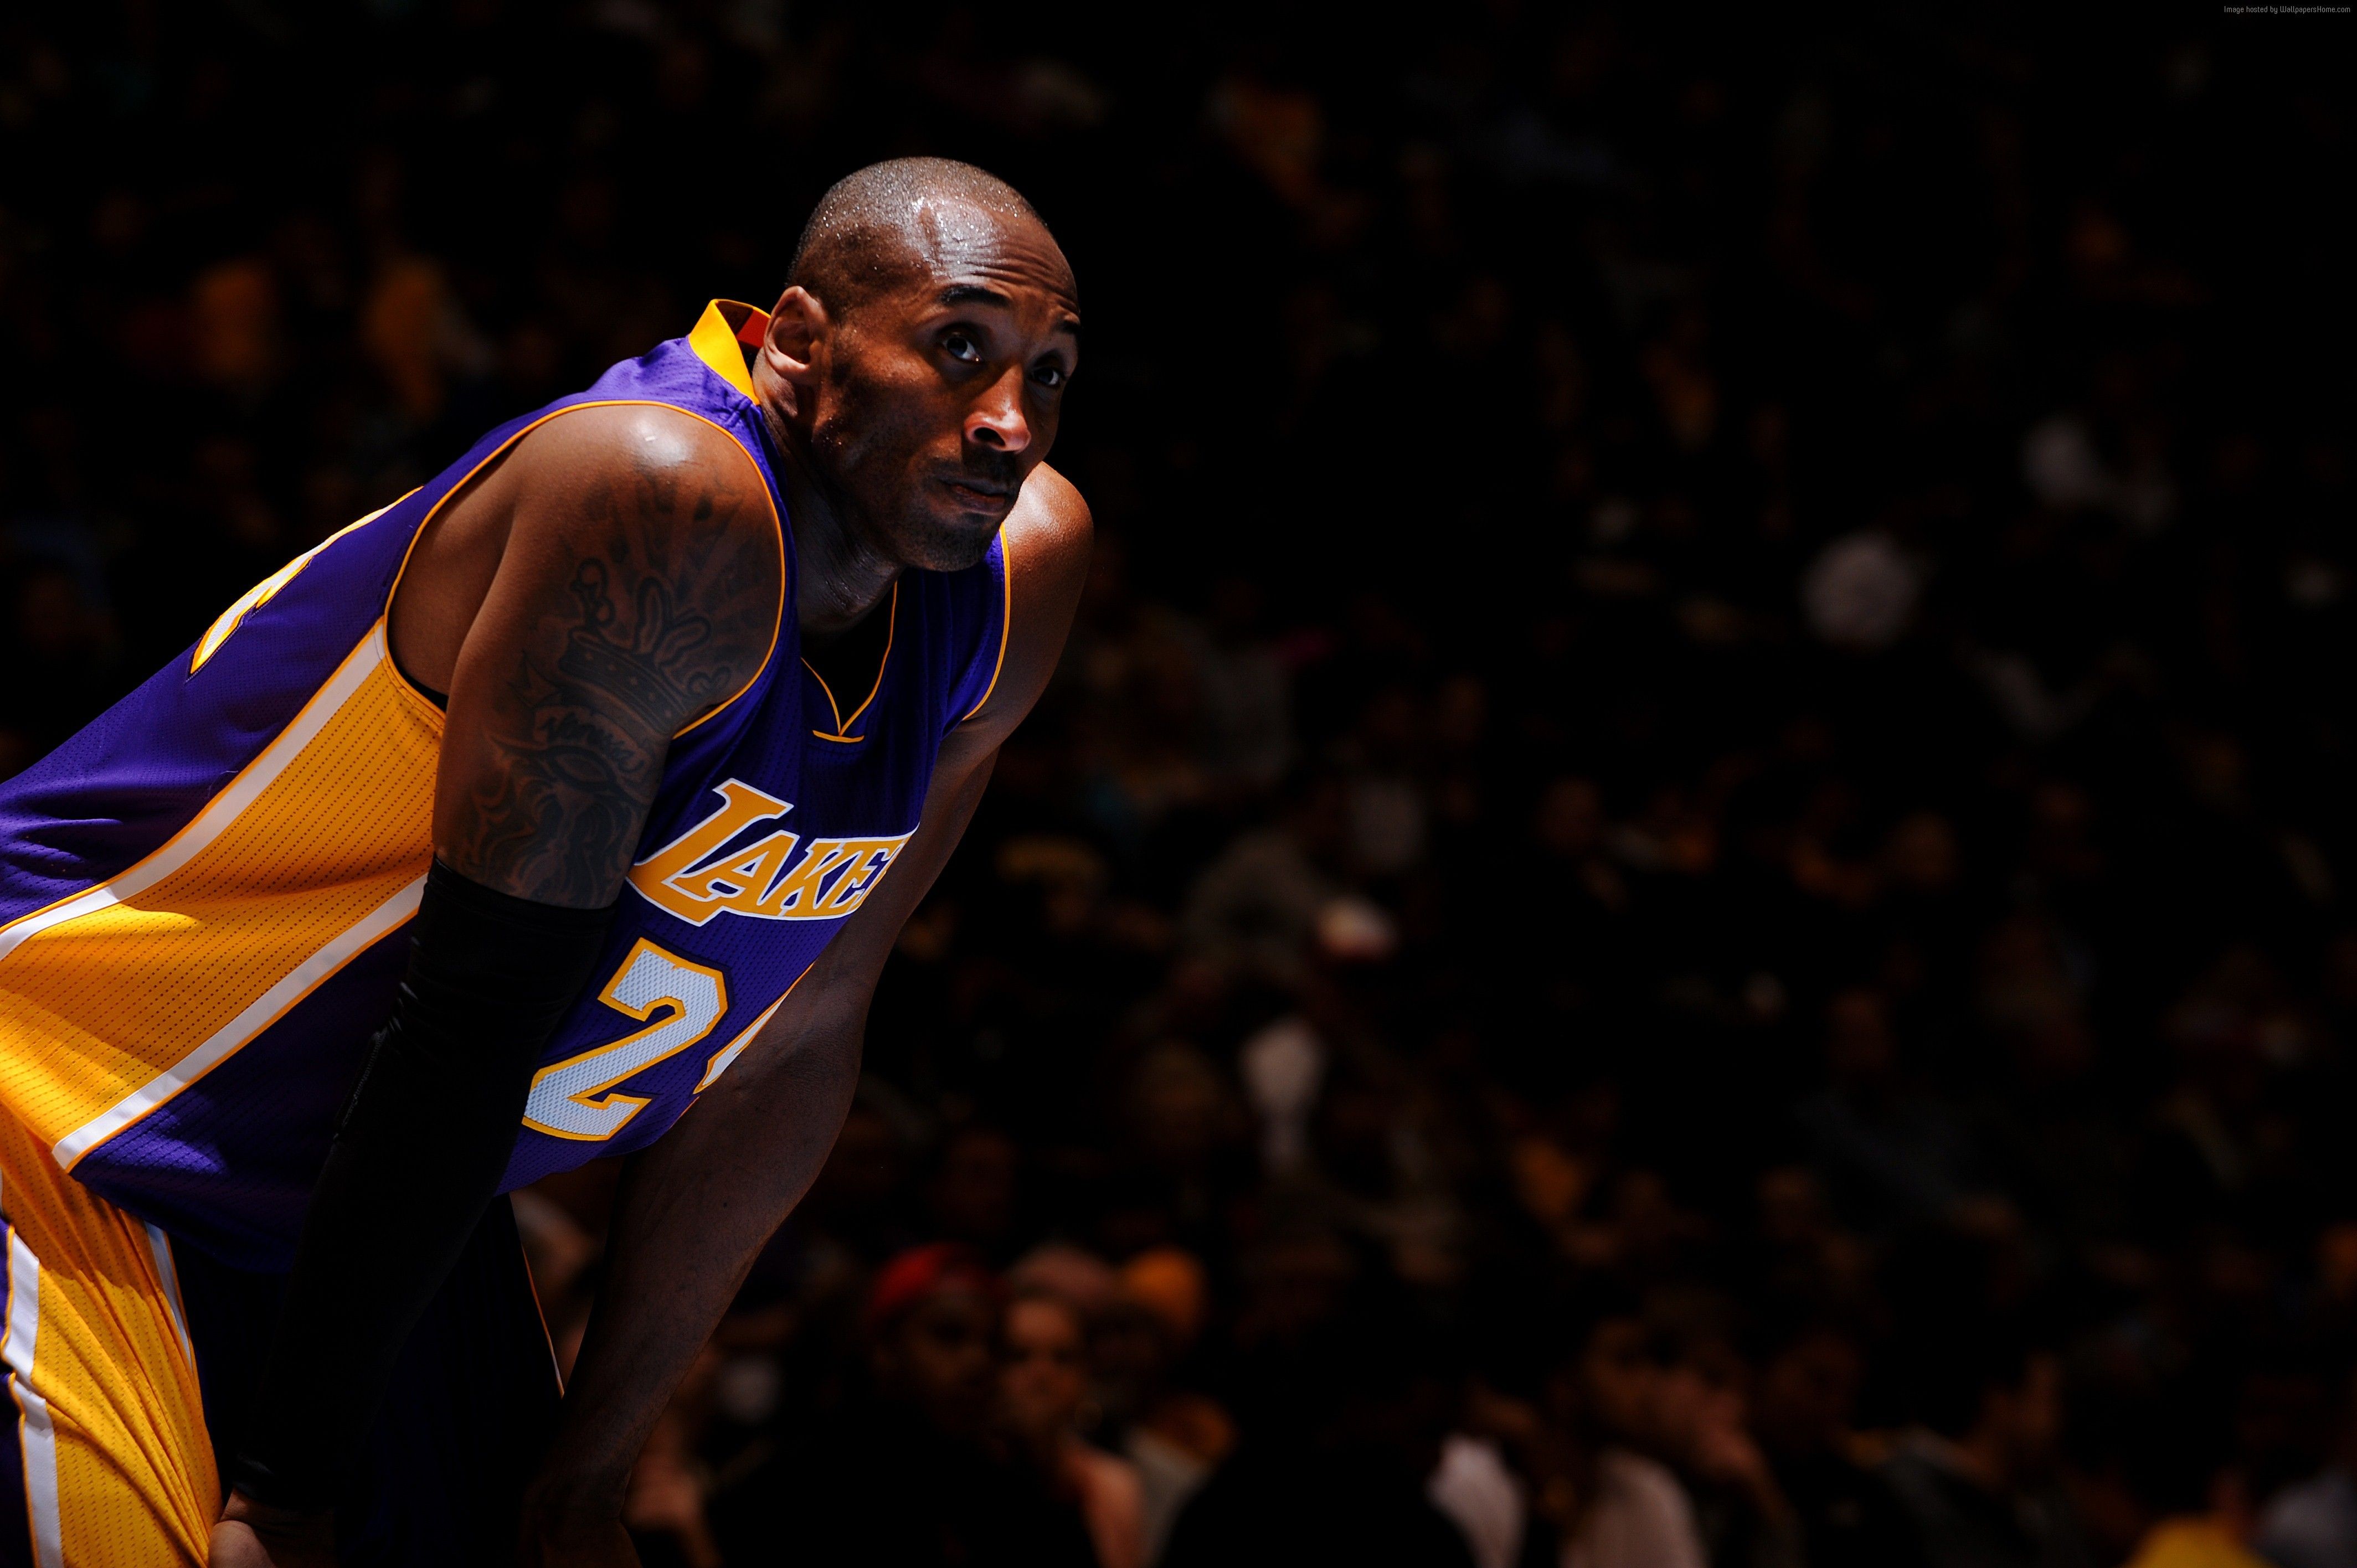 Free download Wallpaper NBA Kobe Bryant Best Basketball Players of [4256x2832] for your Desktop, Mobile & Tablet. Explore NBA Player Wallpaper. NBA Player Wallpaper, Player Background, Player Wallpaper